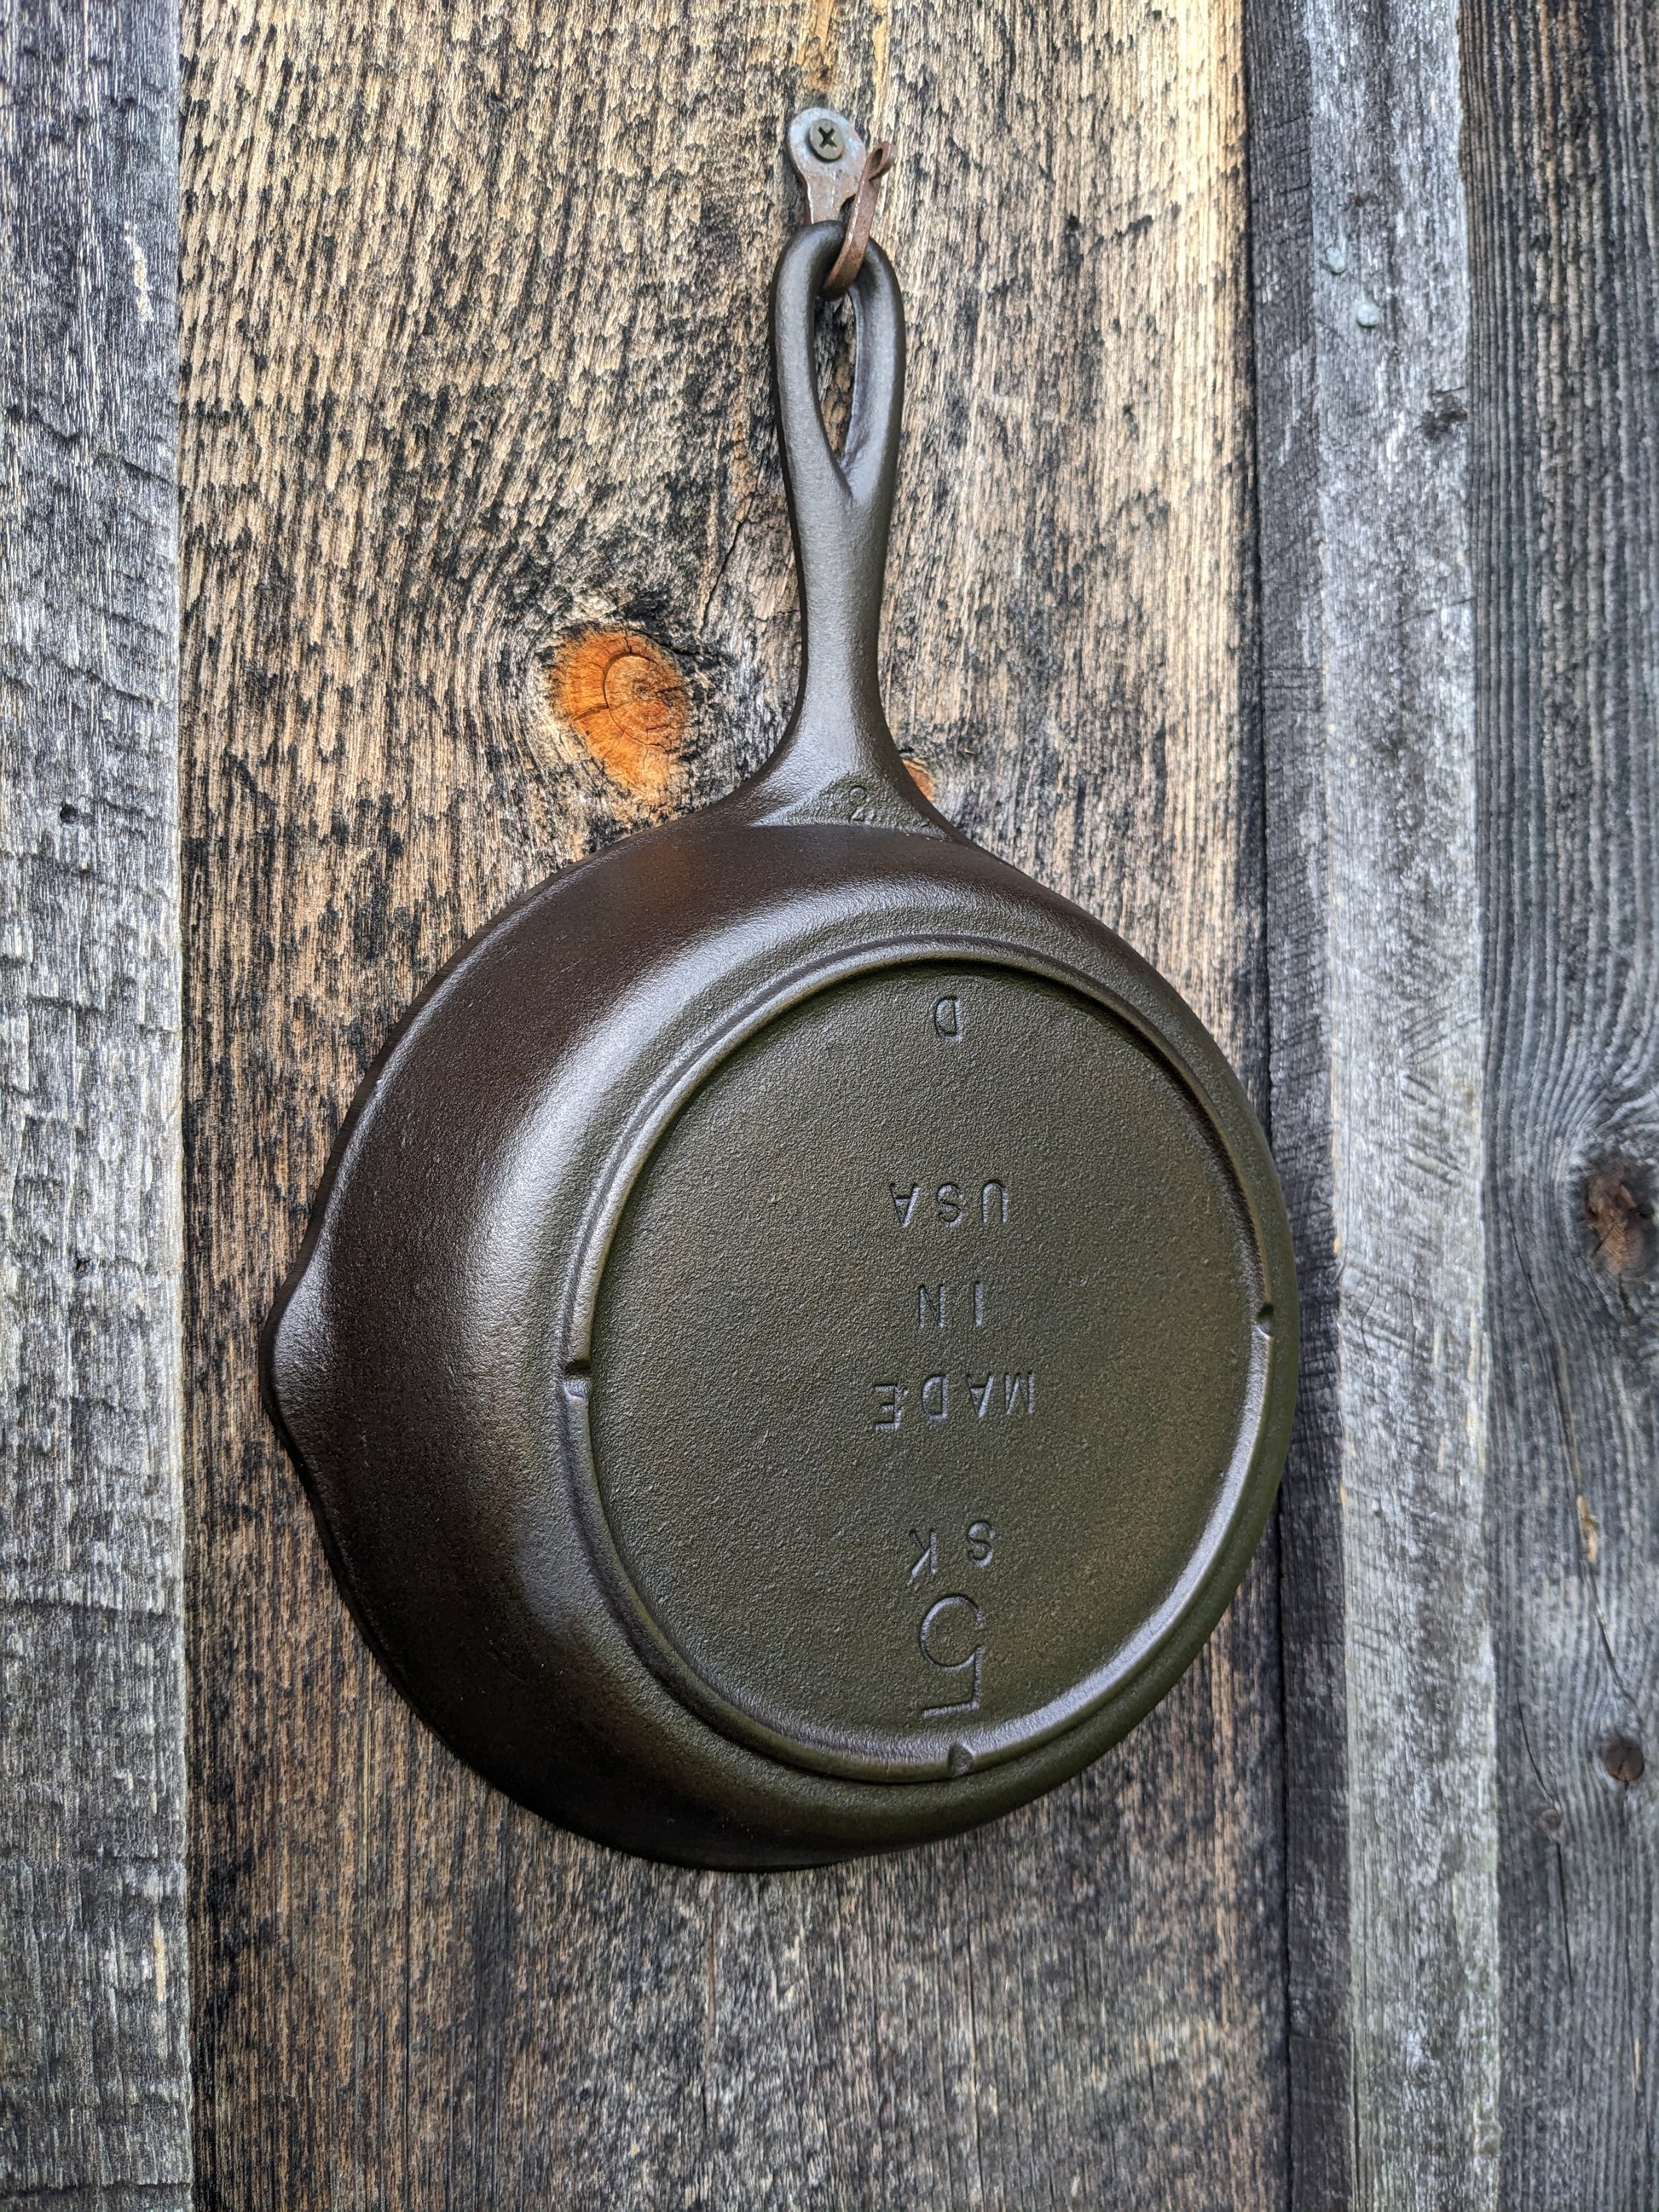 Cast Iron Cookware SK USA D No 5 Skillet #52 – TheDepot.LakeviewOhio